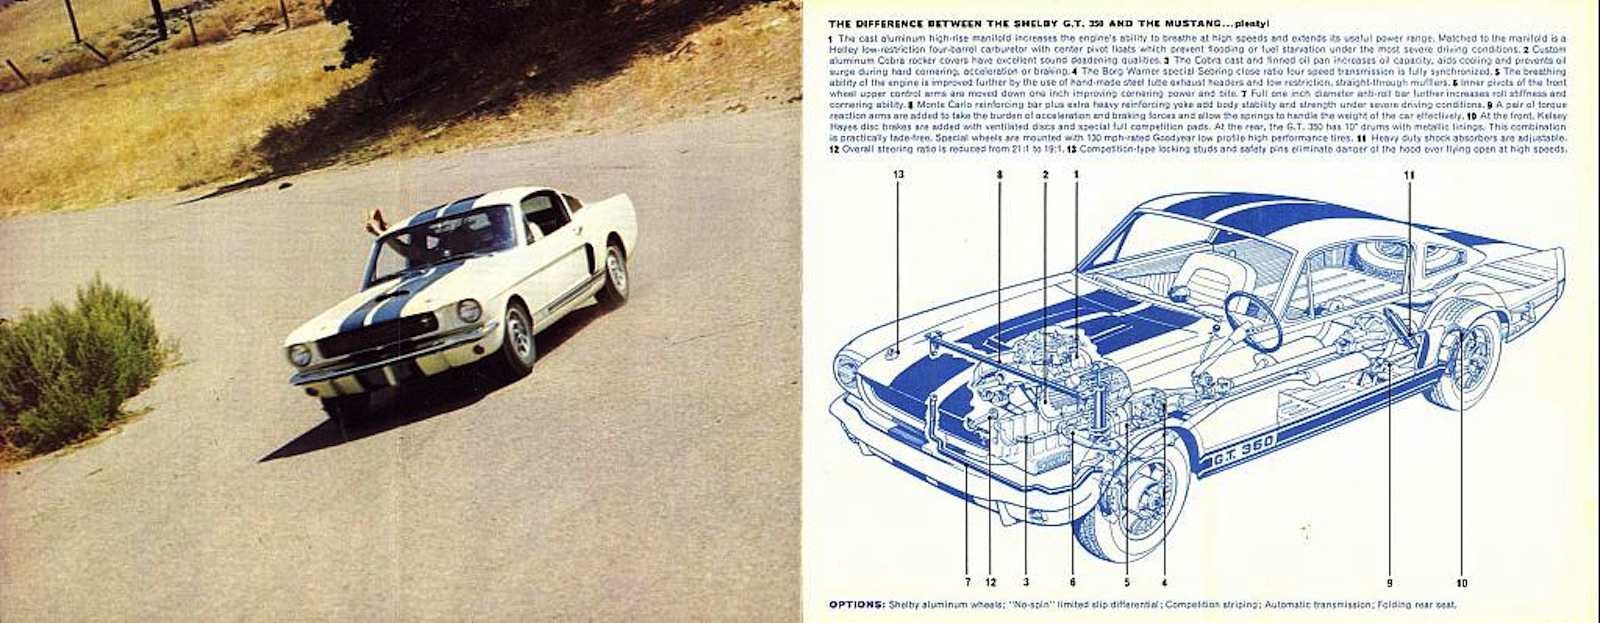 1965 FORD SHELBY GT 350 MUSTANG A3 POSTER AD SALES BROCHURE ADVERTISEMENT ADVERT